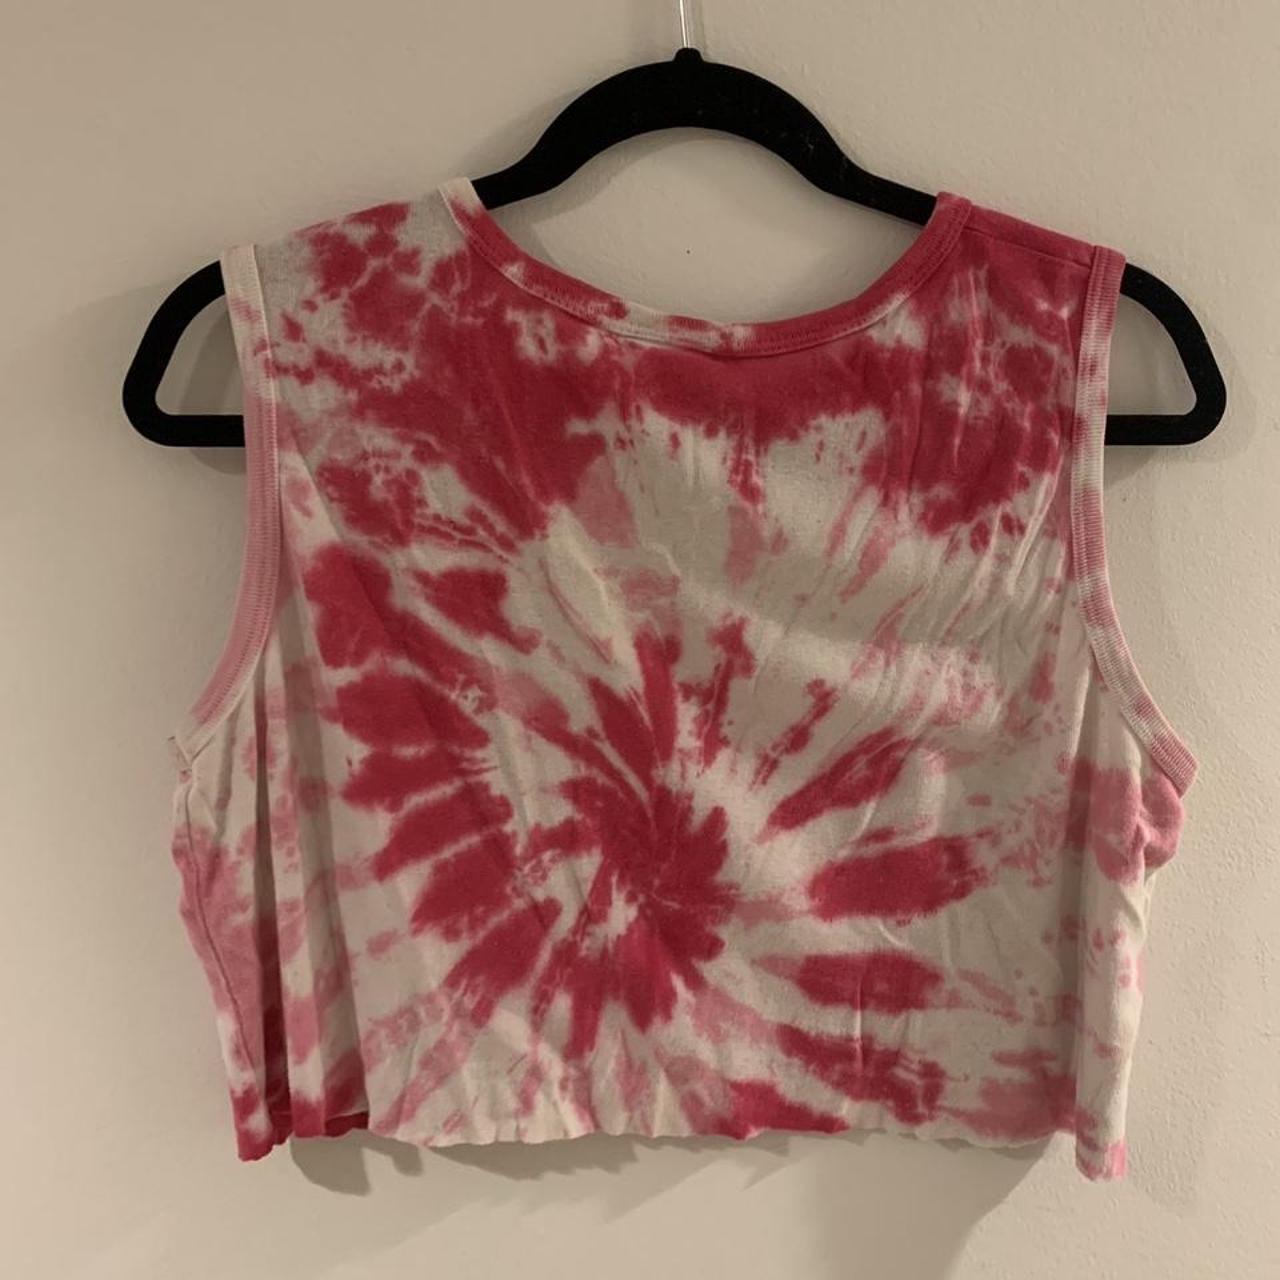 Product Image 3 - Rose pink and white tye